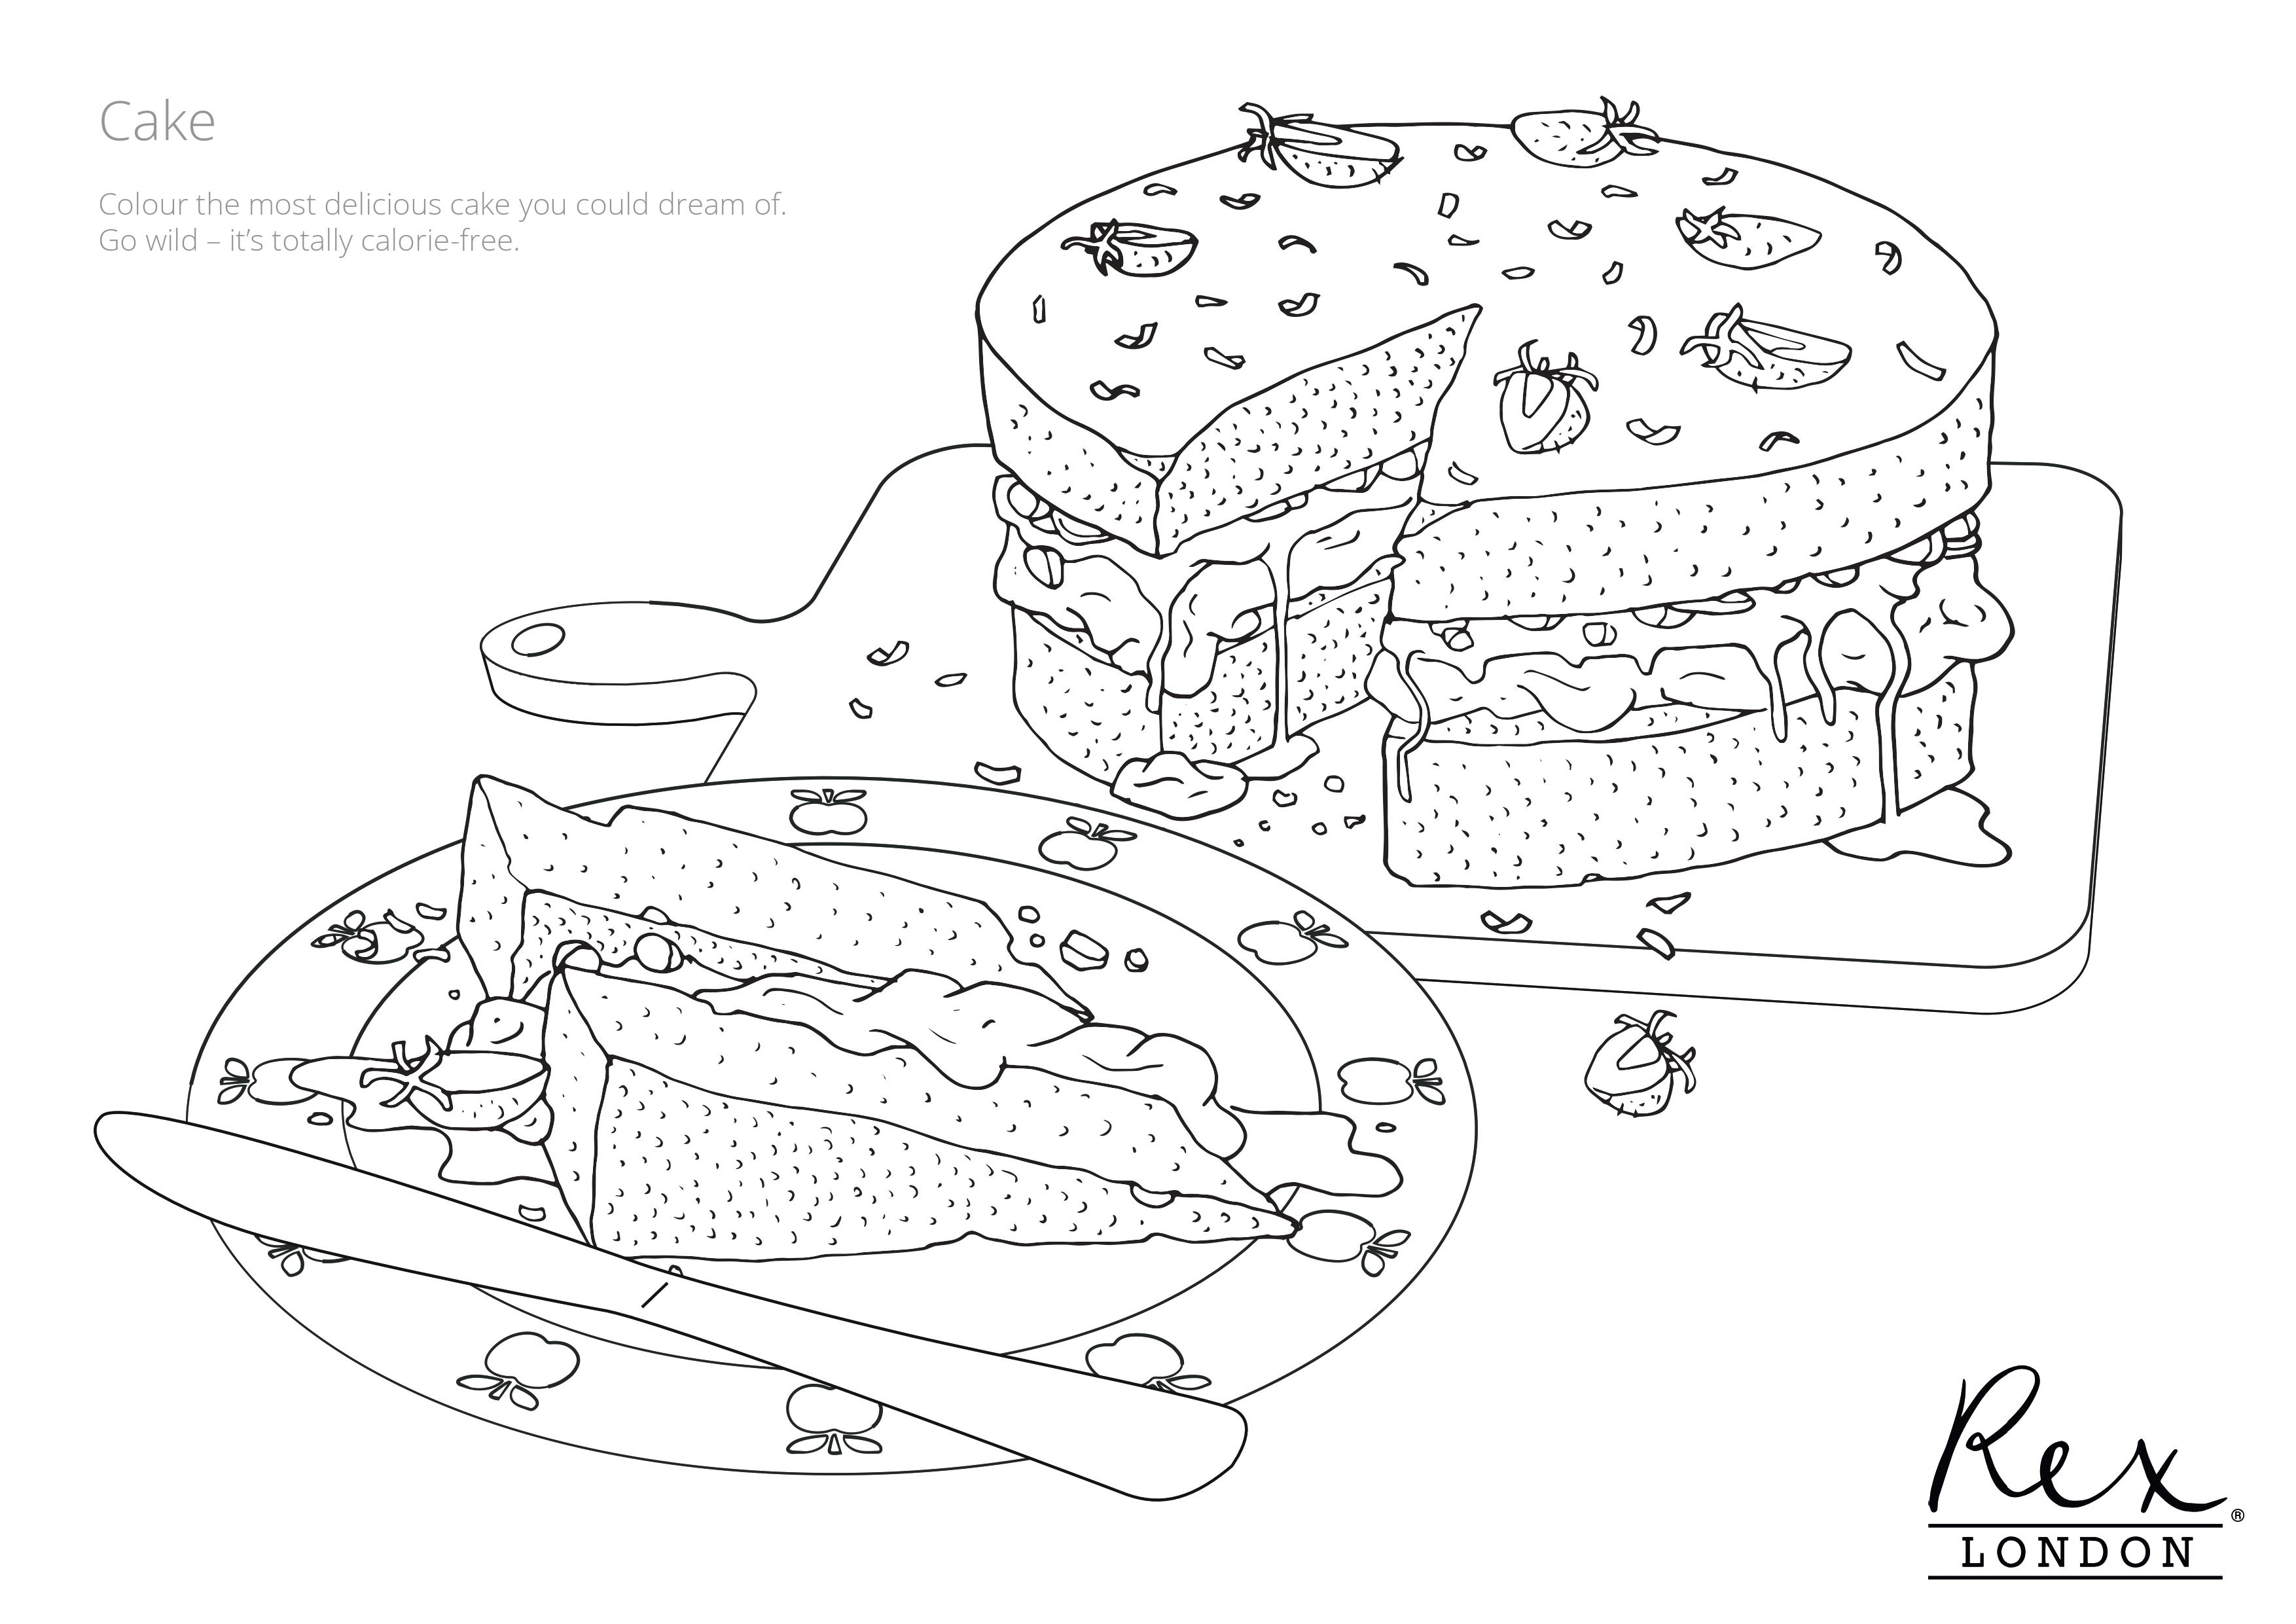 Free baking colouring pages   Rex London blog